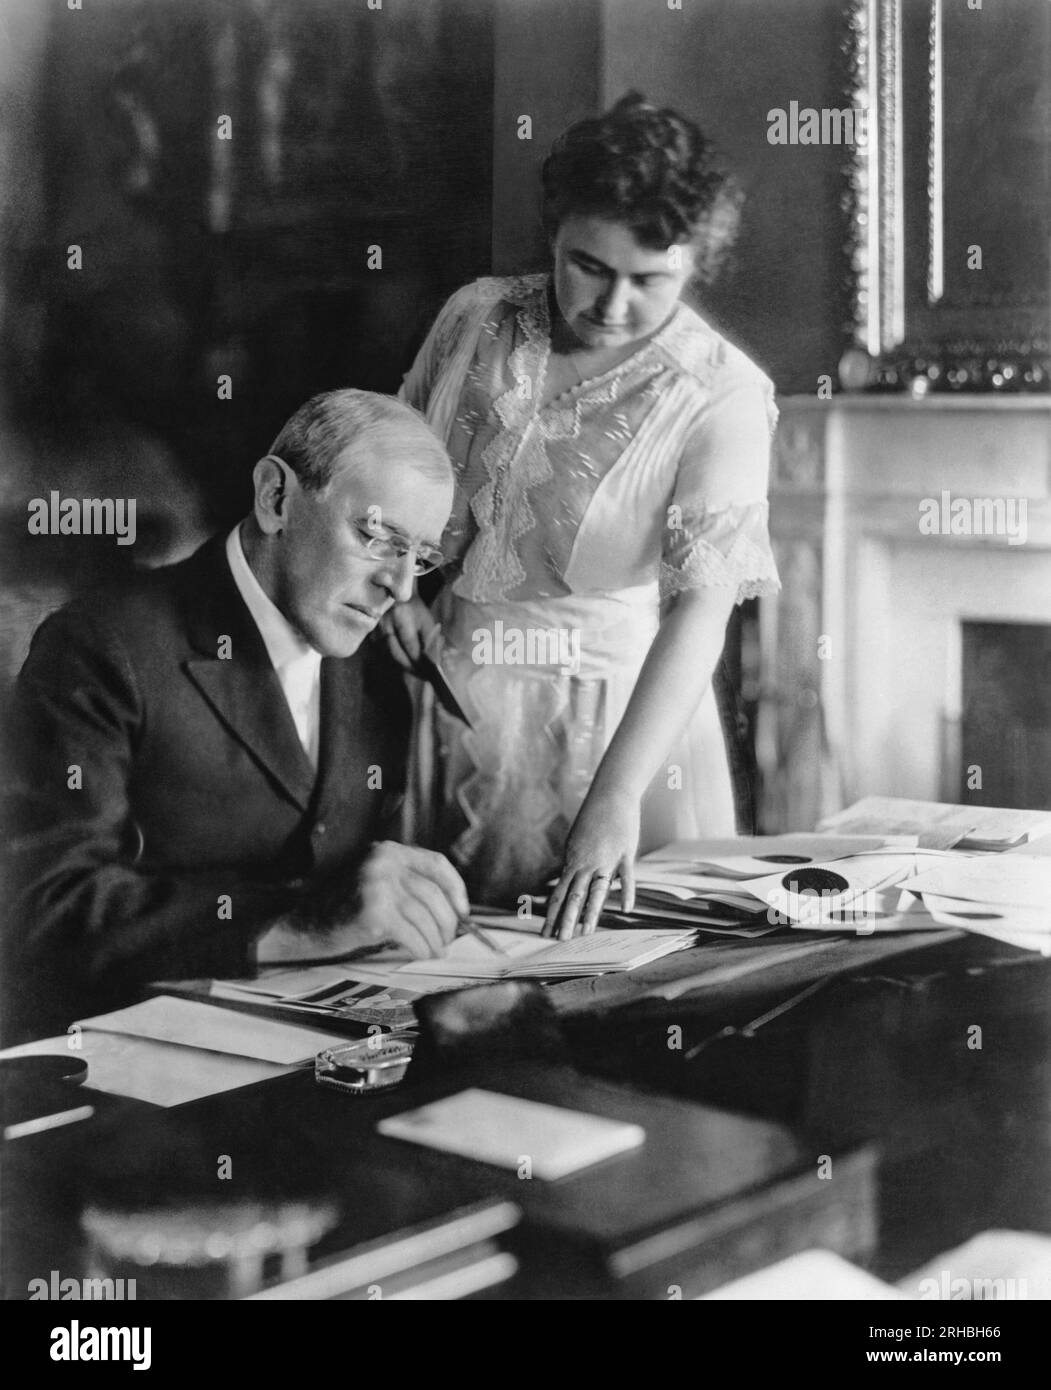 Washington, D.C.:   June, 1920 First Lady Edith Wilson assists President Woodrow Wilson at his desk in the White House. Stock Photo